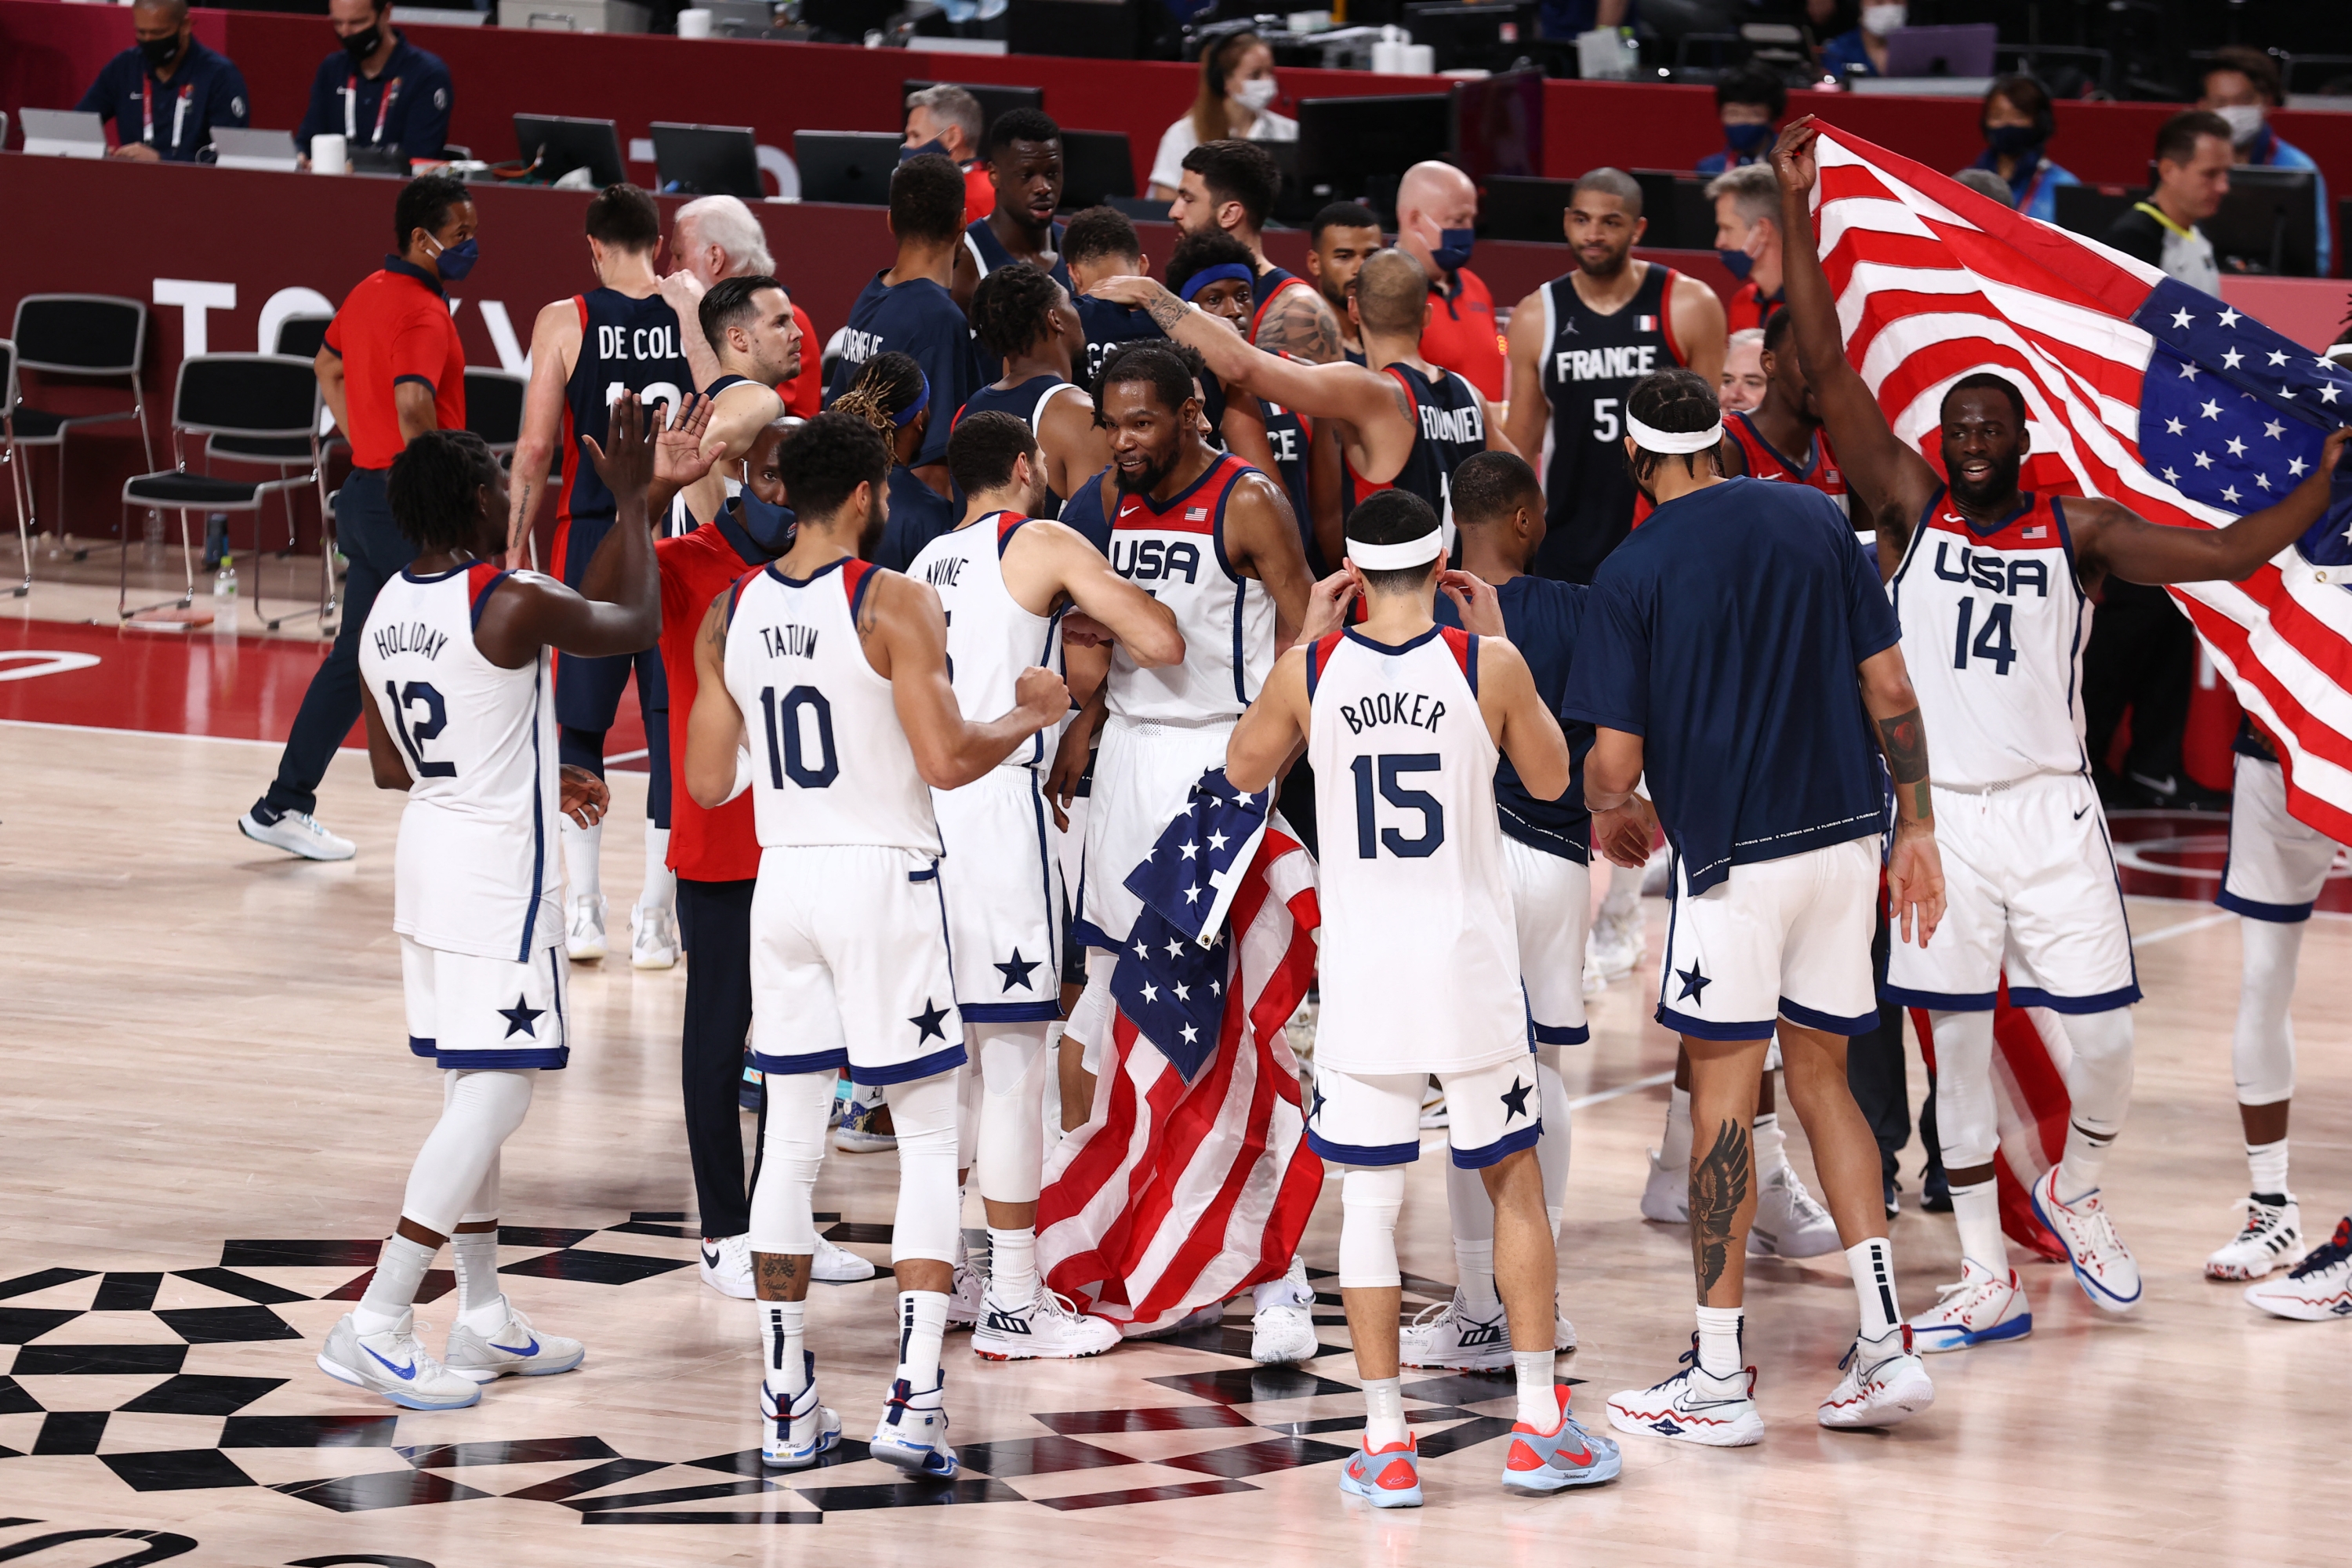 TOKYO, JAPAN -  AUGUST 7: The USA Men's National Team celebrates after the game against the France Men's National Team during the Gold Medal Game of the 2020 Tokyo Olympics on August 7, 2021 at the Super Saitama Arena in Tokyo, Japan. NOTE TO USER: User expressly acknowledges and agrees that, by downloading and or using this Photograph, user is consenting to the terms and conditions of the Getty Images License Agreement. Mandatory Copyright Notice: Copyright 2021 NBAE   Stephen Gosling/NBAE via Getty Images/AFP (Photo by Stephen Gosling / NBAE / Getty Images / Getty Images via AFP)